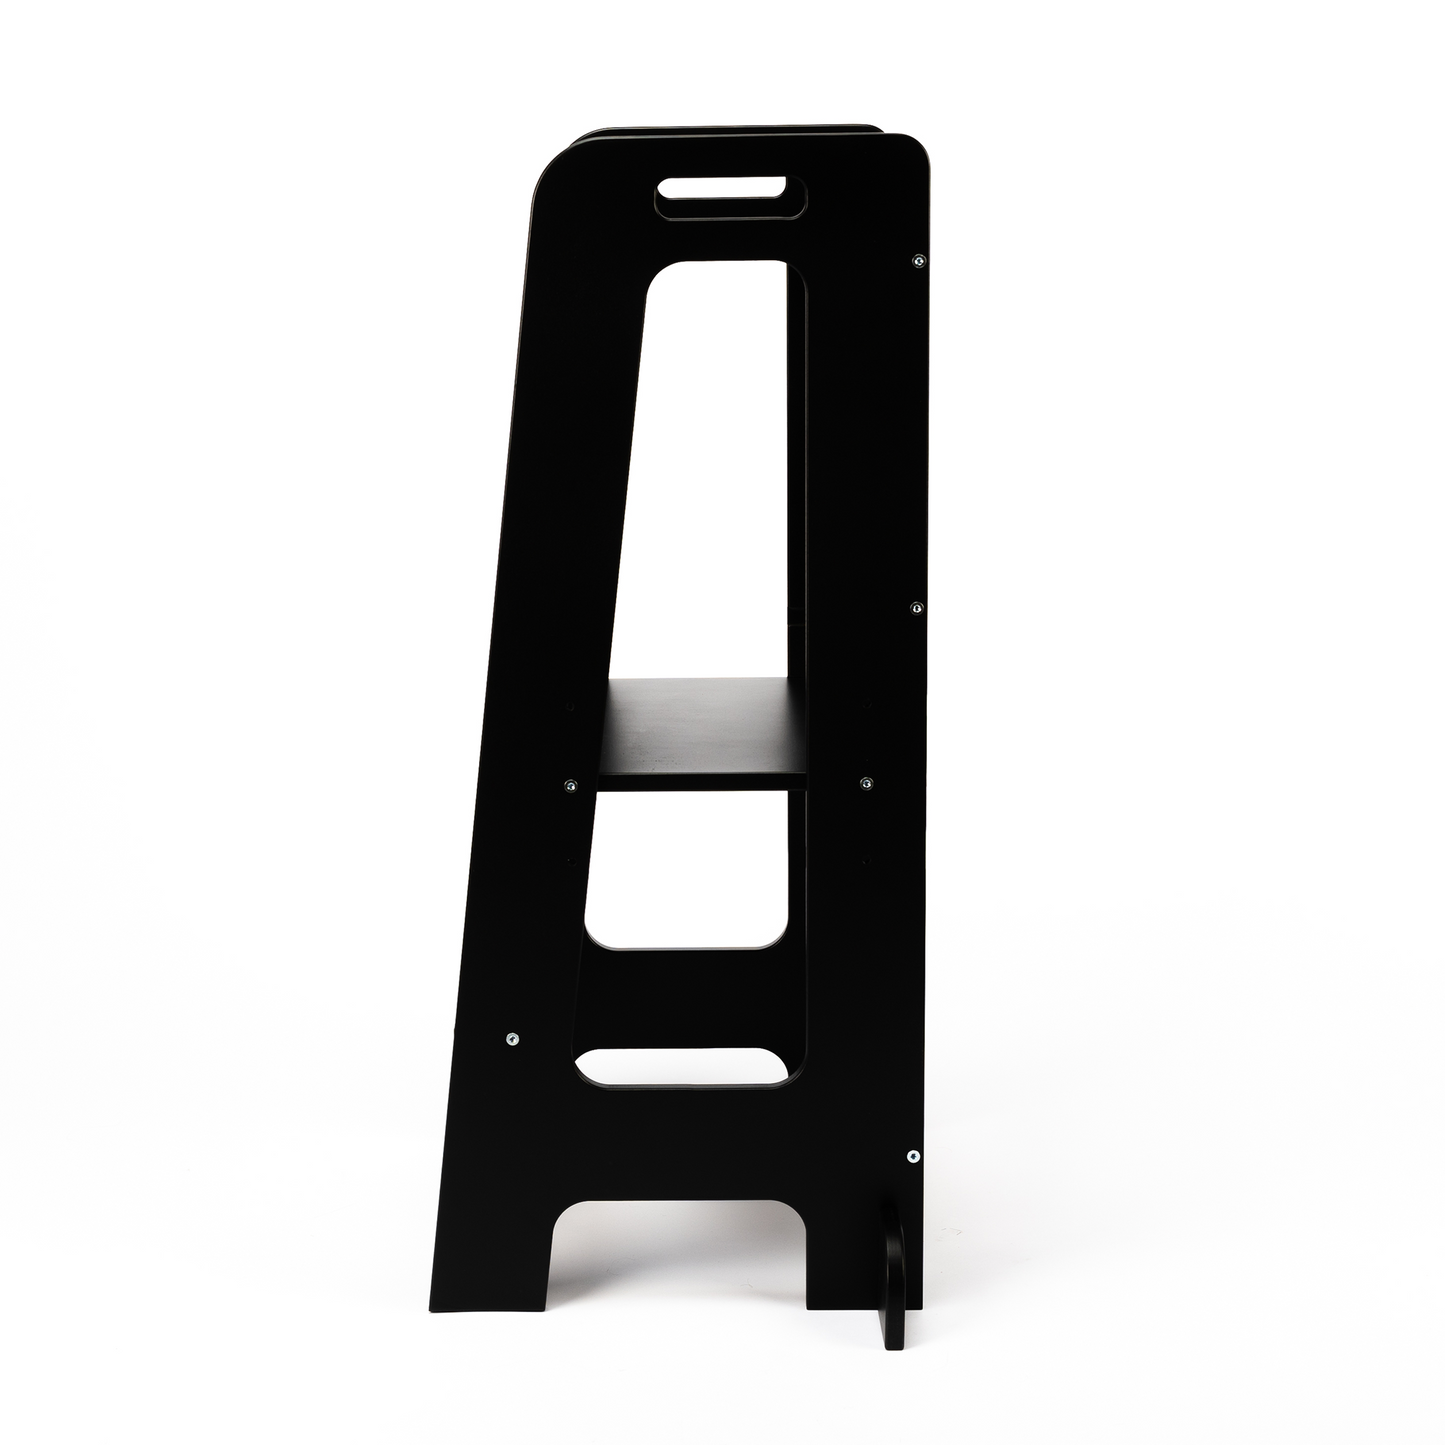 Adjustable Height Learning Tower with Blackboard KNEL2